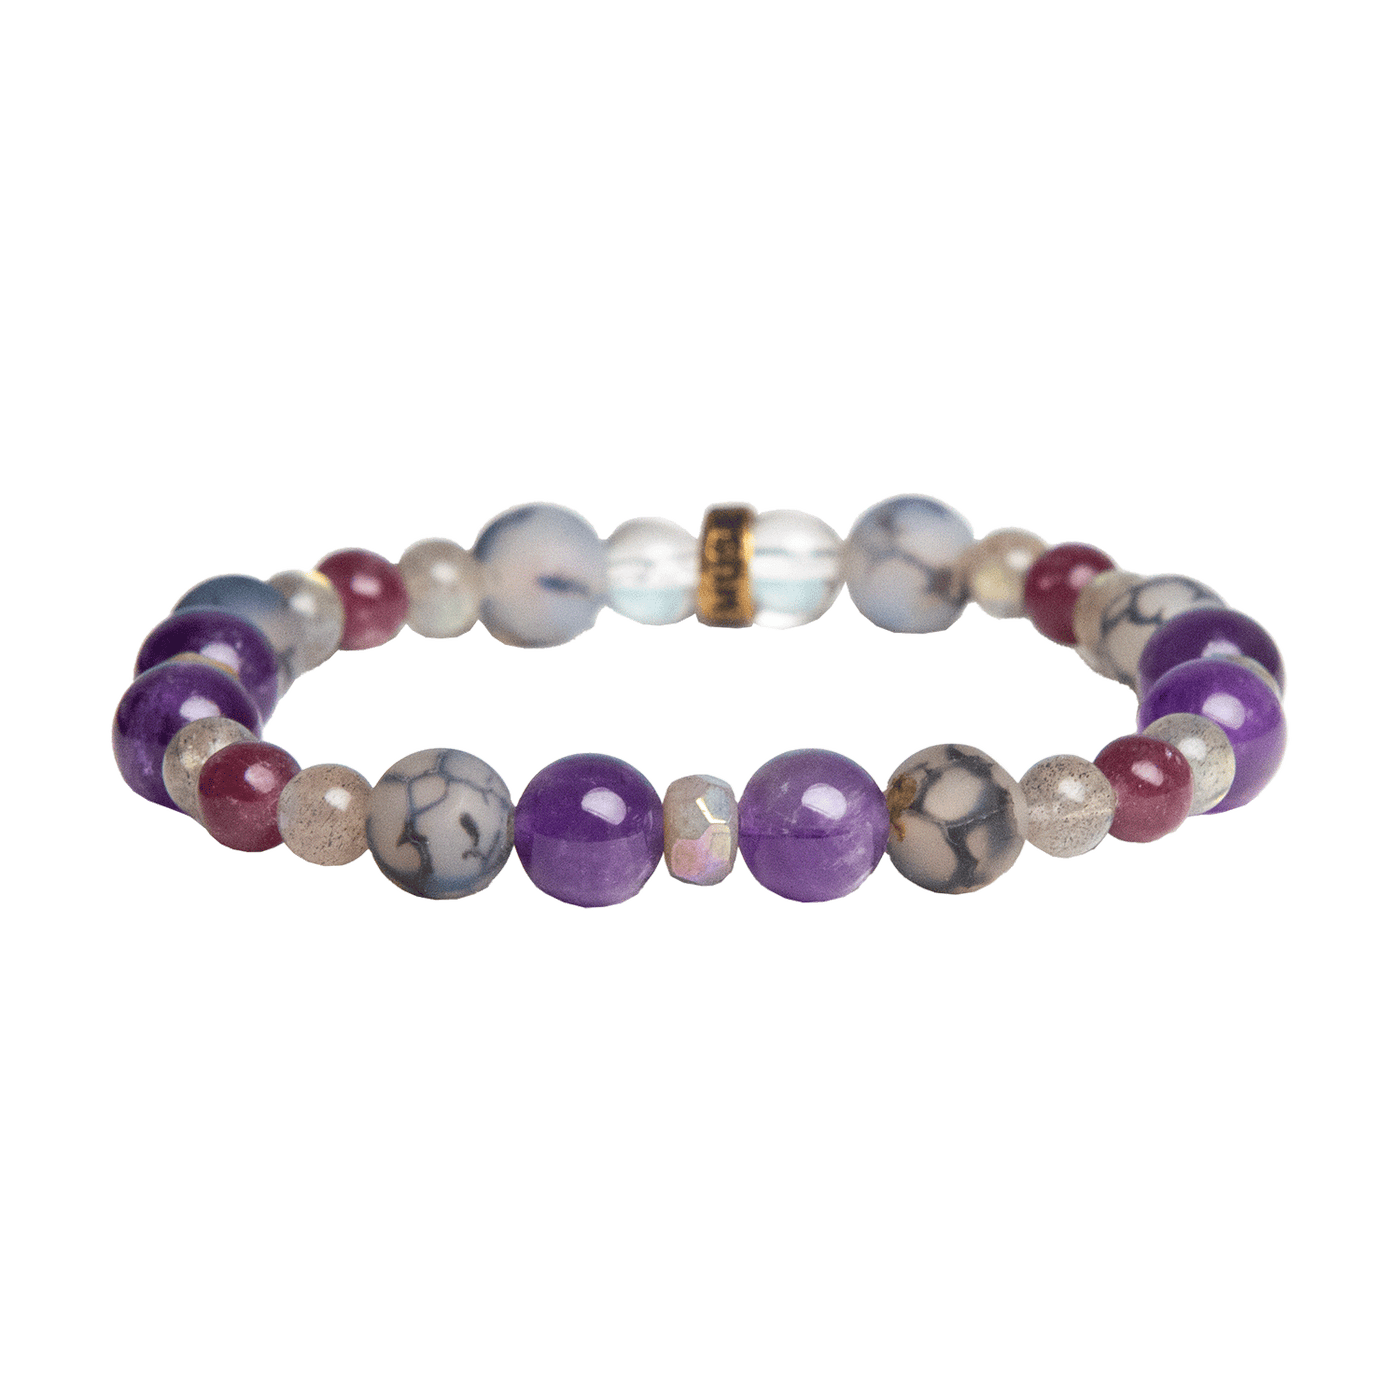 side view of new exclusive crystal formula Miracles Bracelet by Energy Muse featuring Amethyst, Lepidolite, Web Agate, Labradorite, and Aura Gray Moonstone.